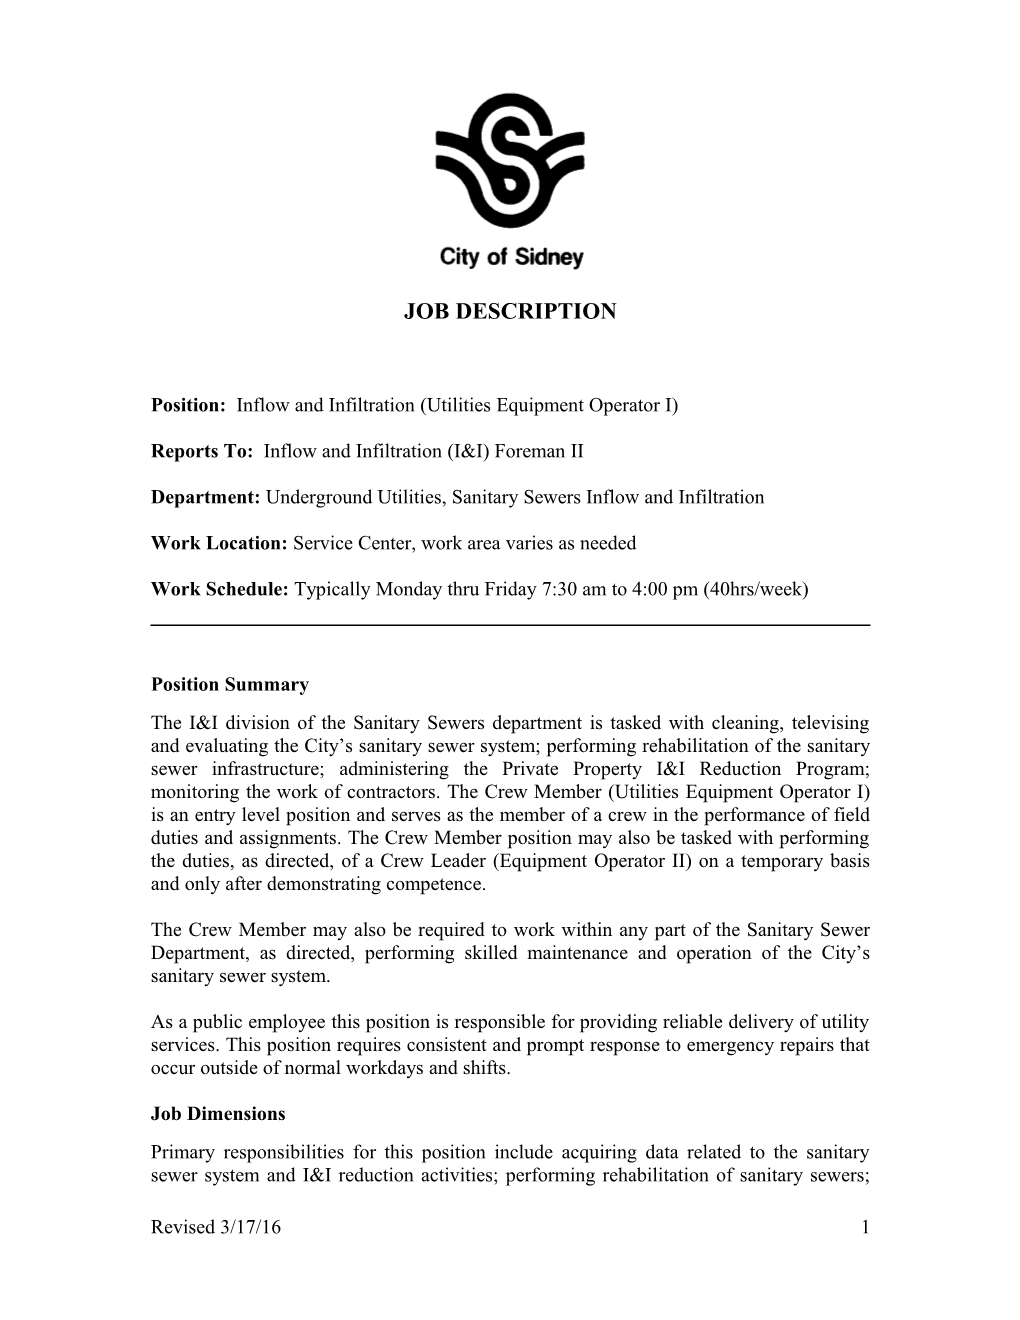 Position: Inflow and Infiltration (Utilities Equipment Operator I)